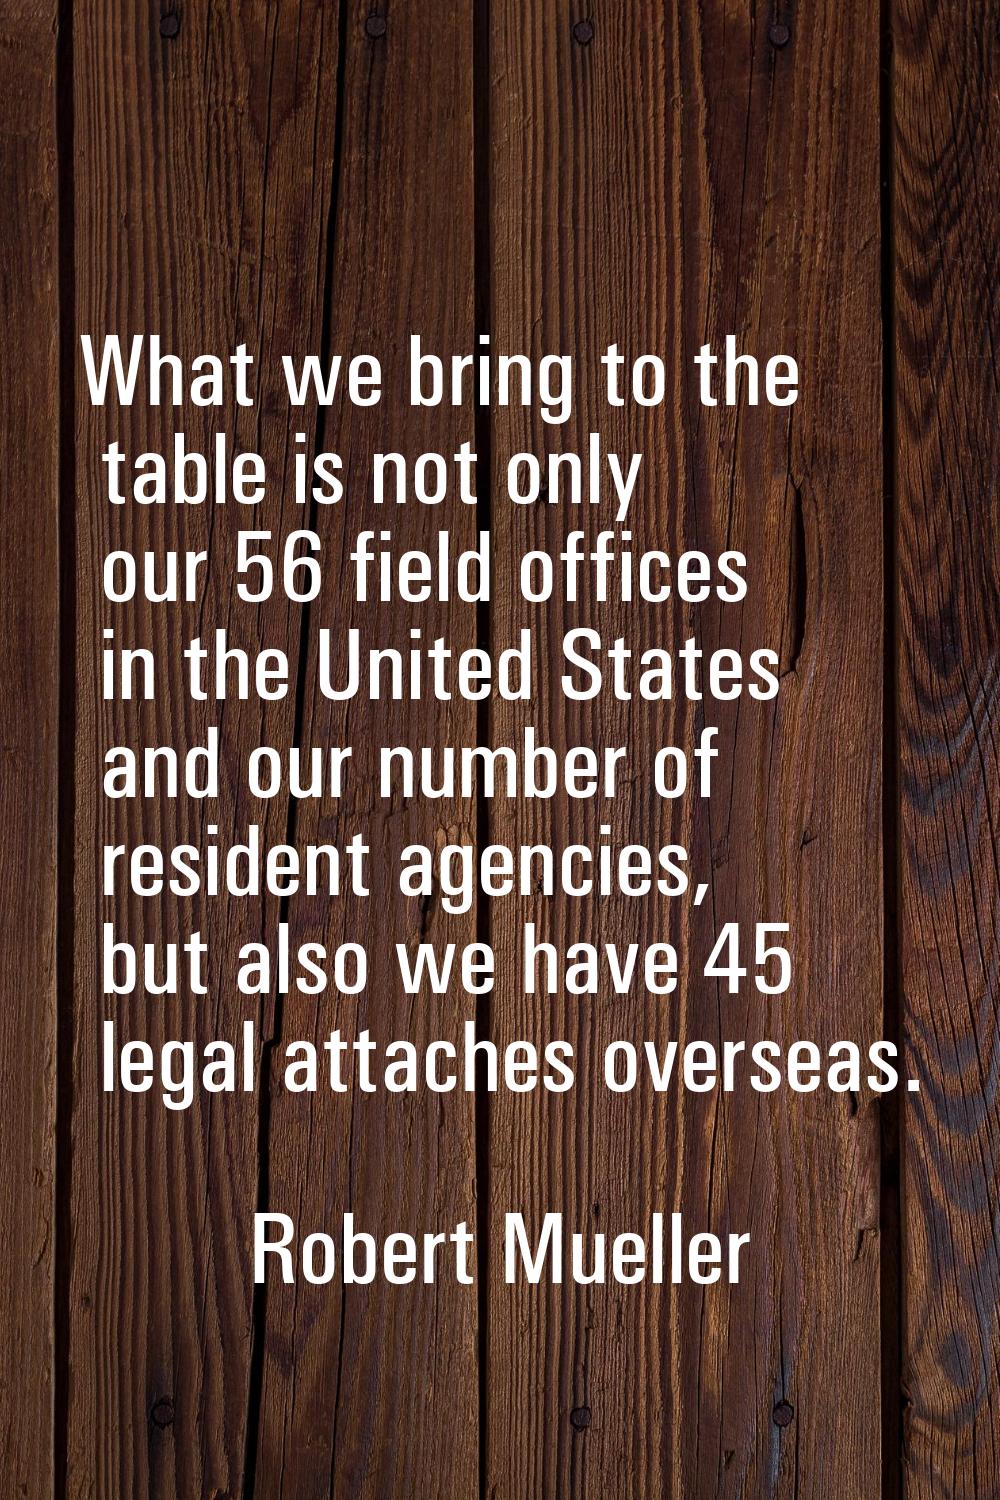 What we bring to the table is not only our 56 field offices in the United States and our number of 